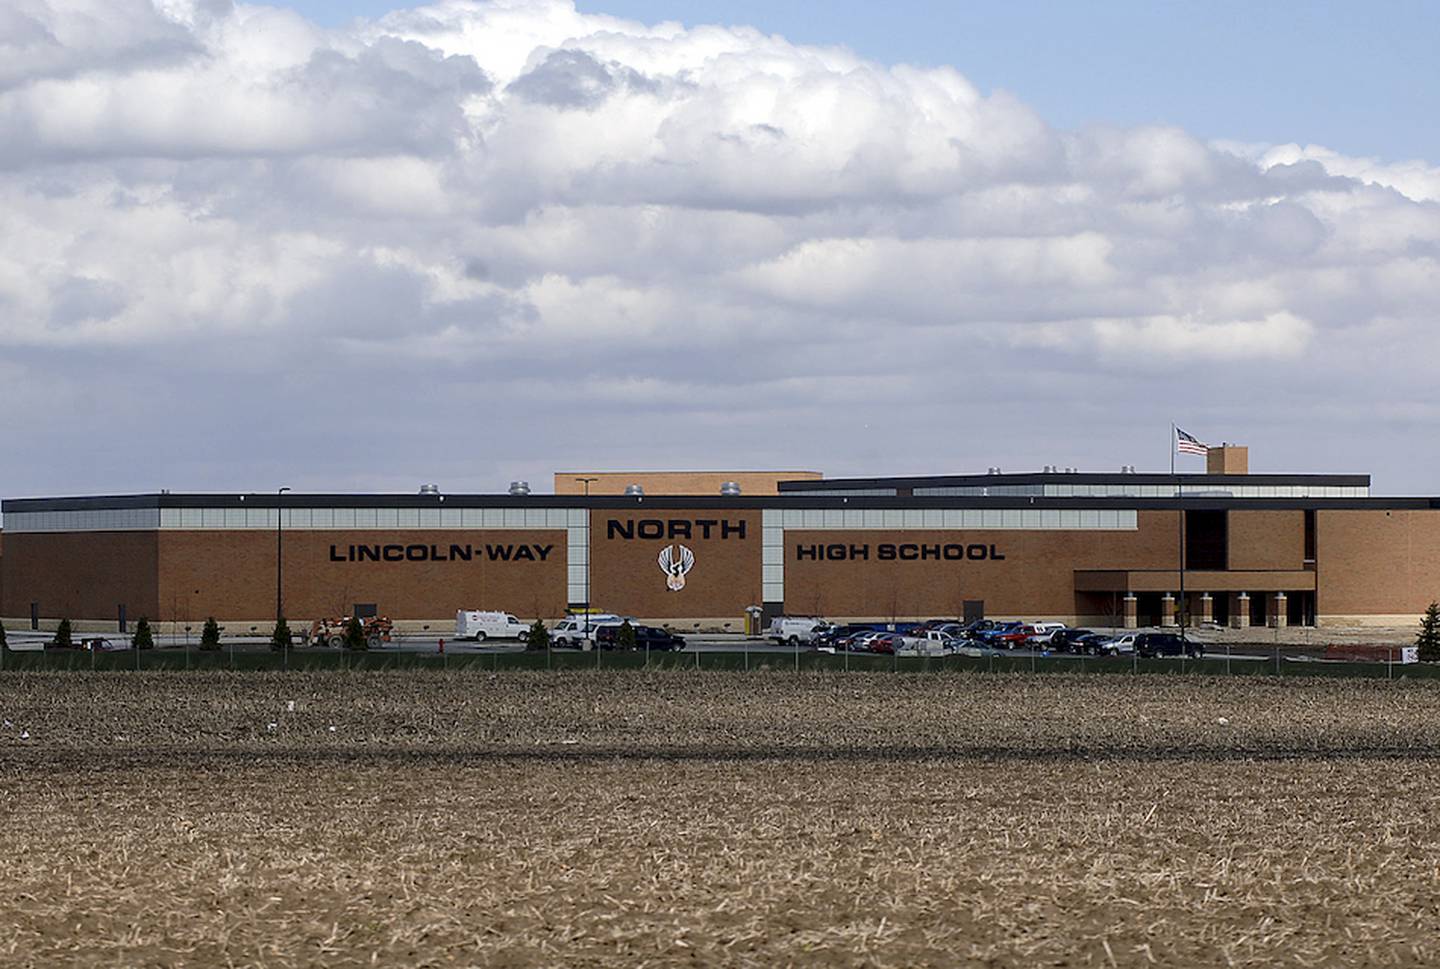 Lincoln-Way North High School in Frankfort is seen shortly before it opened. The school was built after a 2006 referendum passed to accommodate an expected influx of students that never came. Now, district leaders are considering shuttering one of Lincoln-Way's four academic buildings to deal with financial problems.